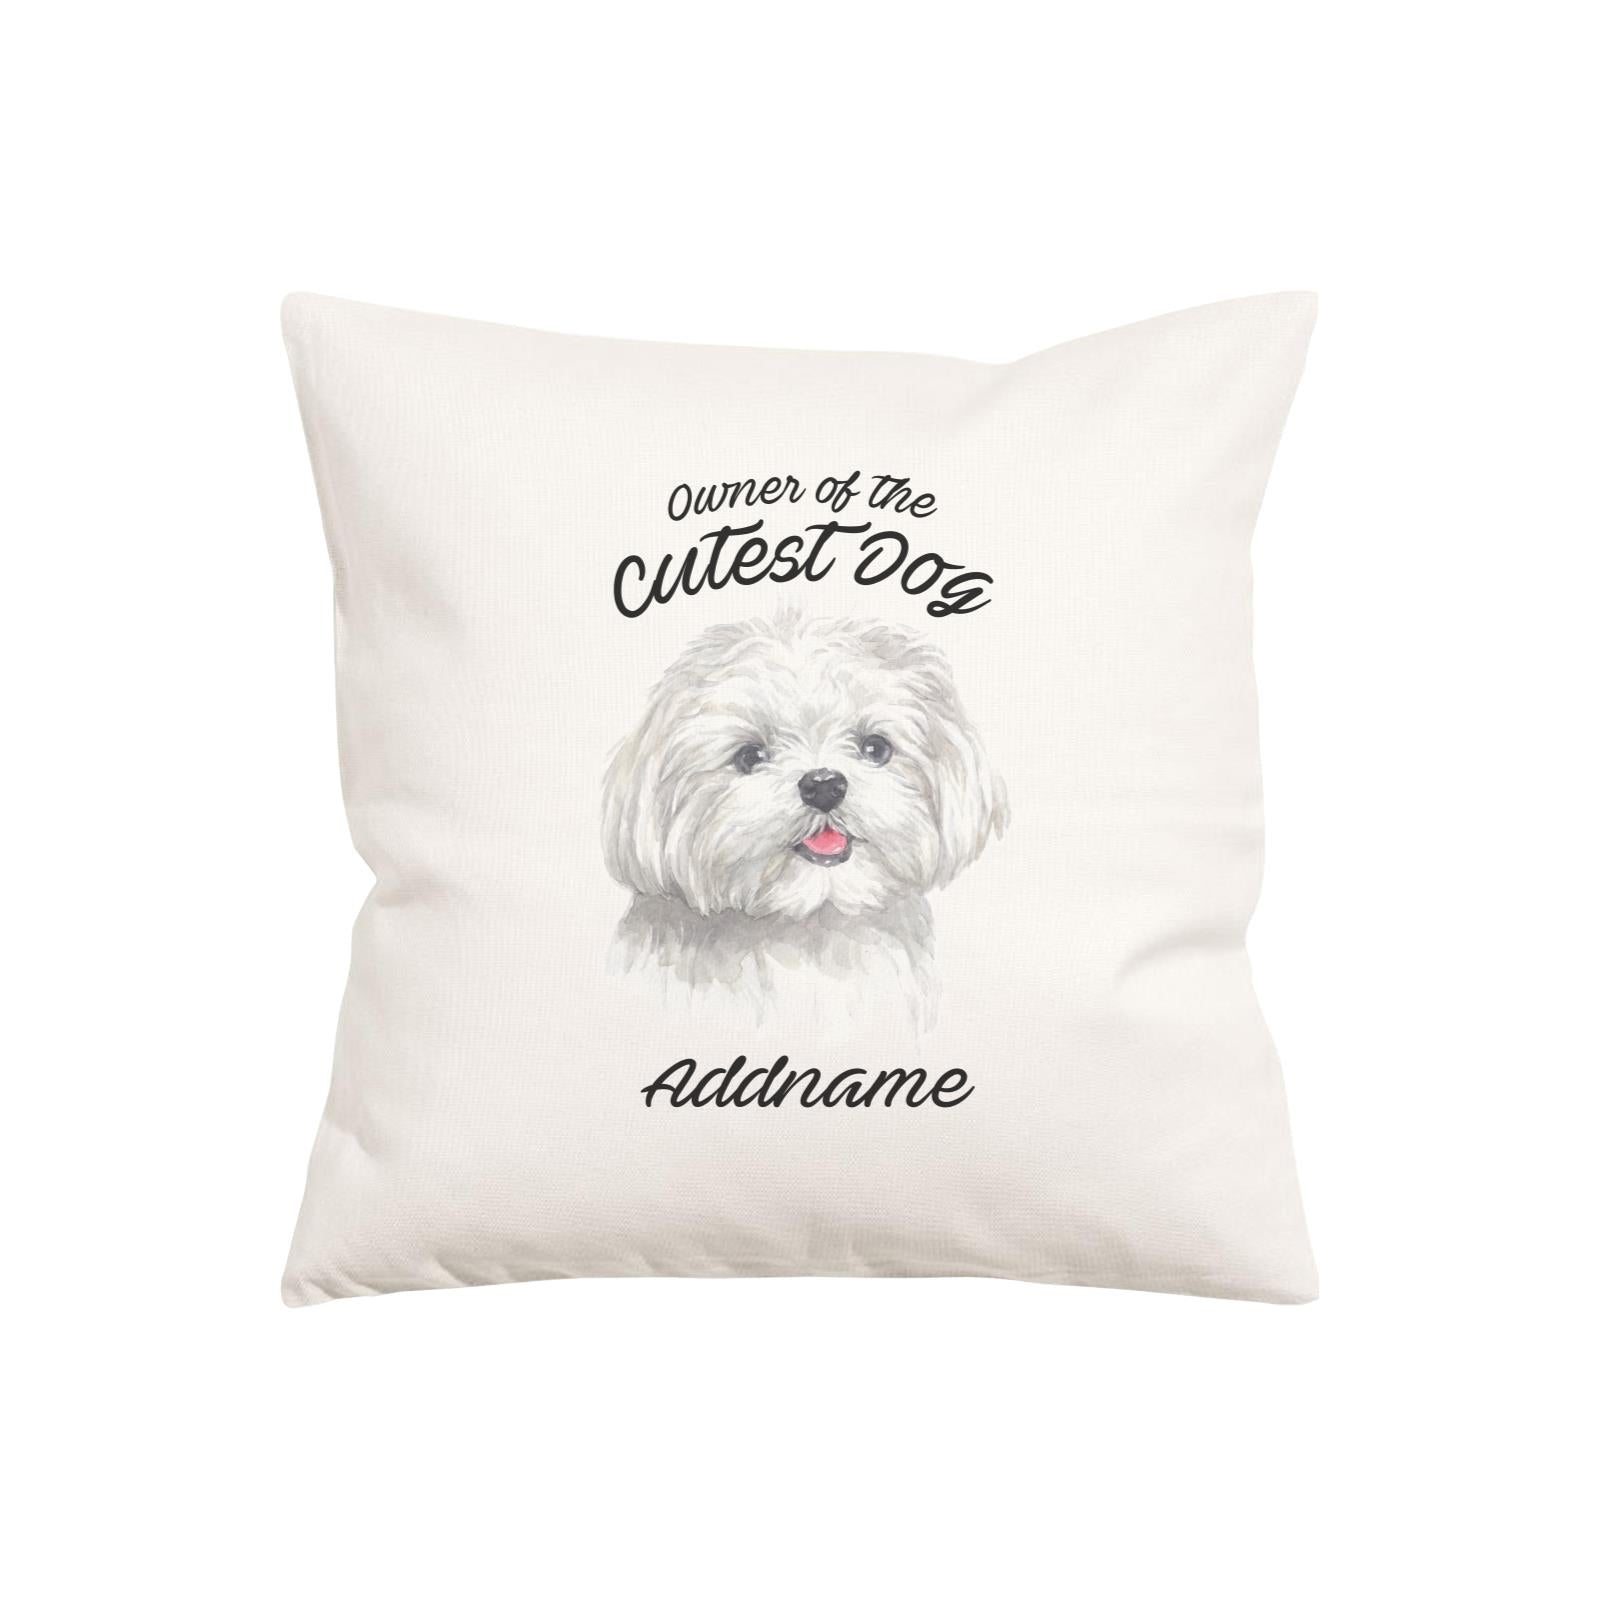 Watercolor Dog Owner Of The Cutest Dog Maltese Addname Pillow Cushion